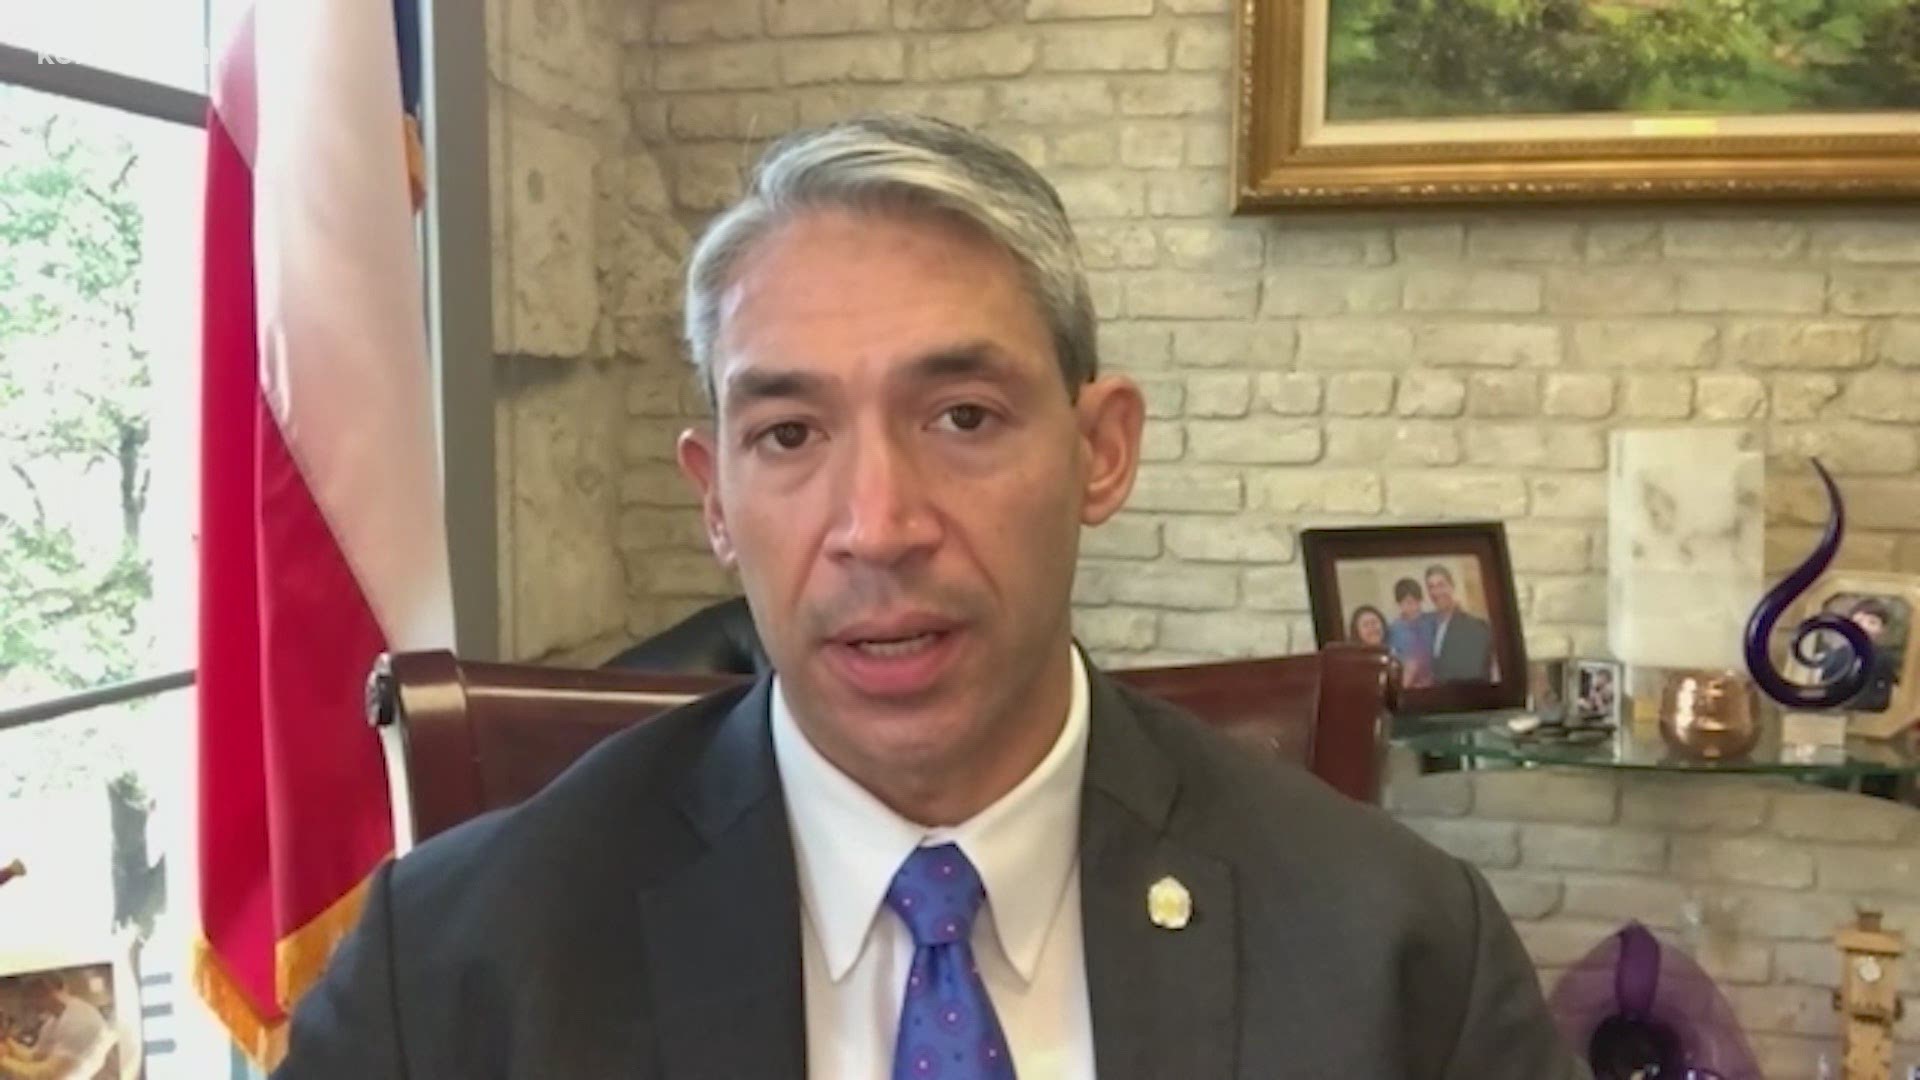 San Antonio's mayor, along with Bexar County officials, penned a letter to Texas's governor urging him to consider vaccinating teachers early.